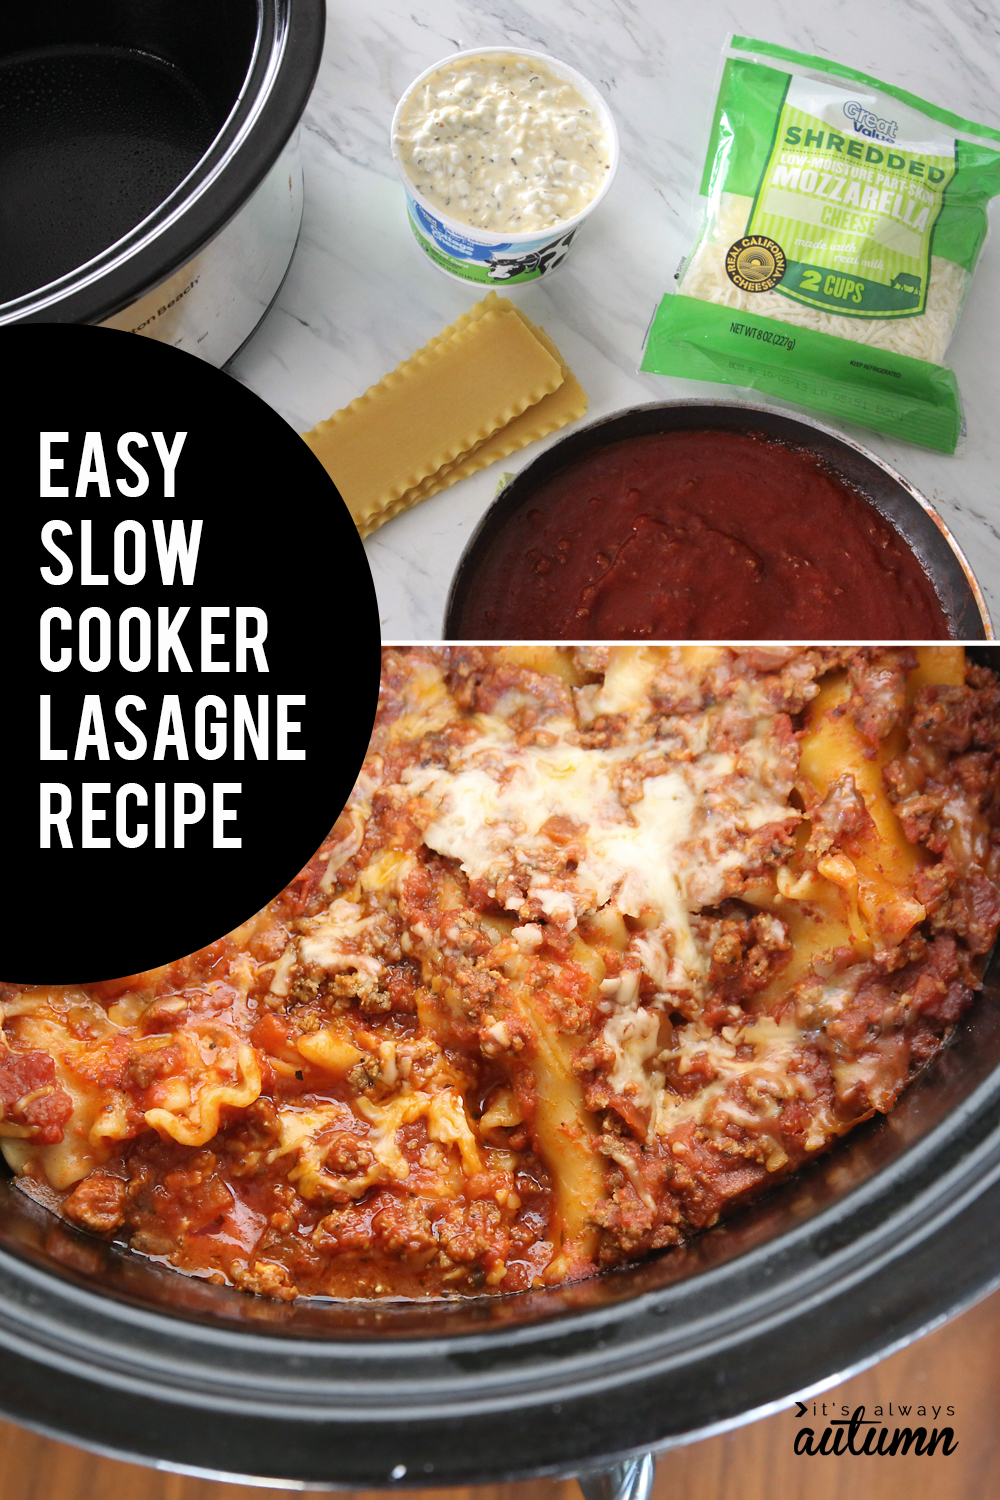 Slow cooker lasagne recipe. Did you know you can make lasagna in the crockpot? No need to heat up your oven!